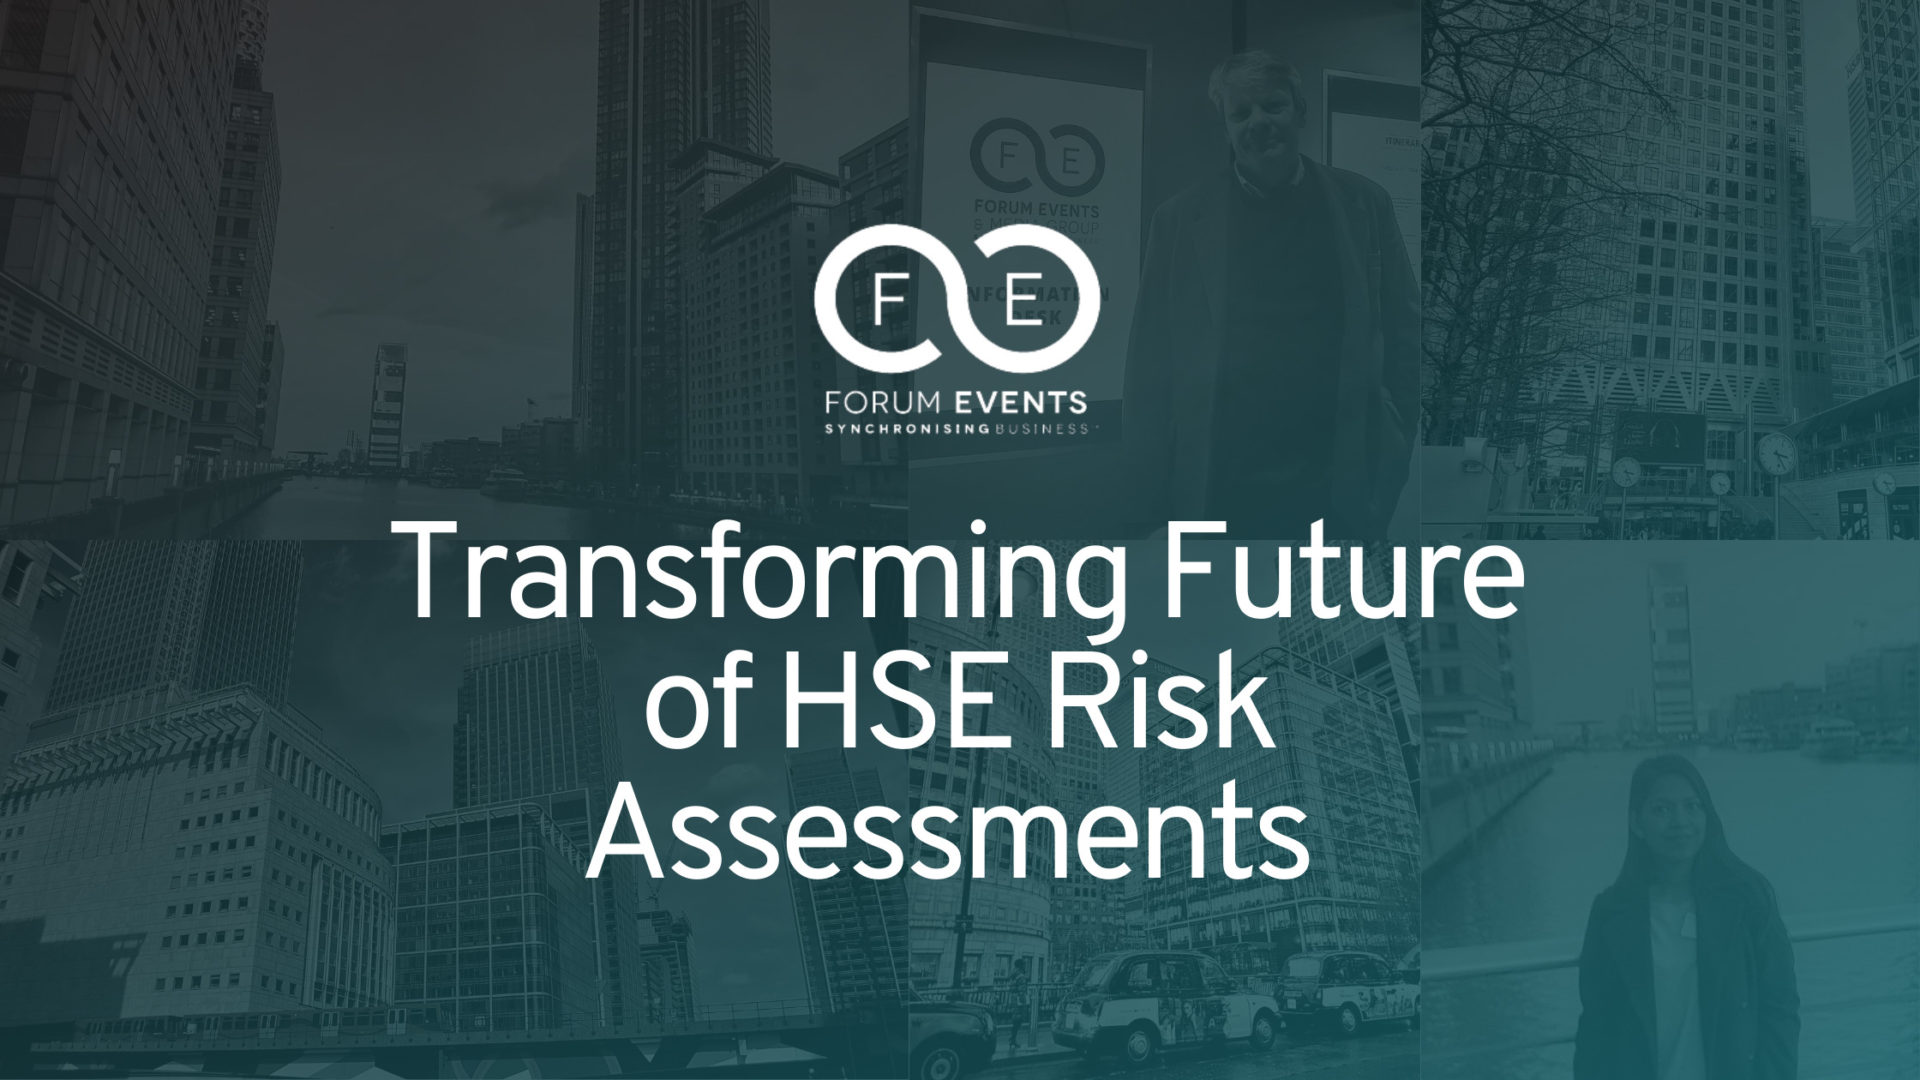 Health and Safety embraces the digital future​: Escaping the shackles of risk assessment